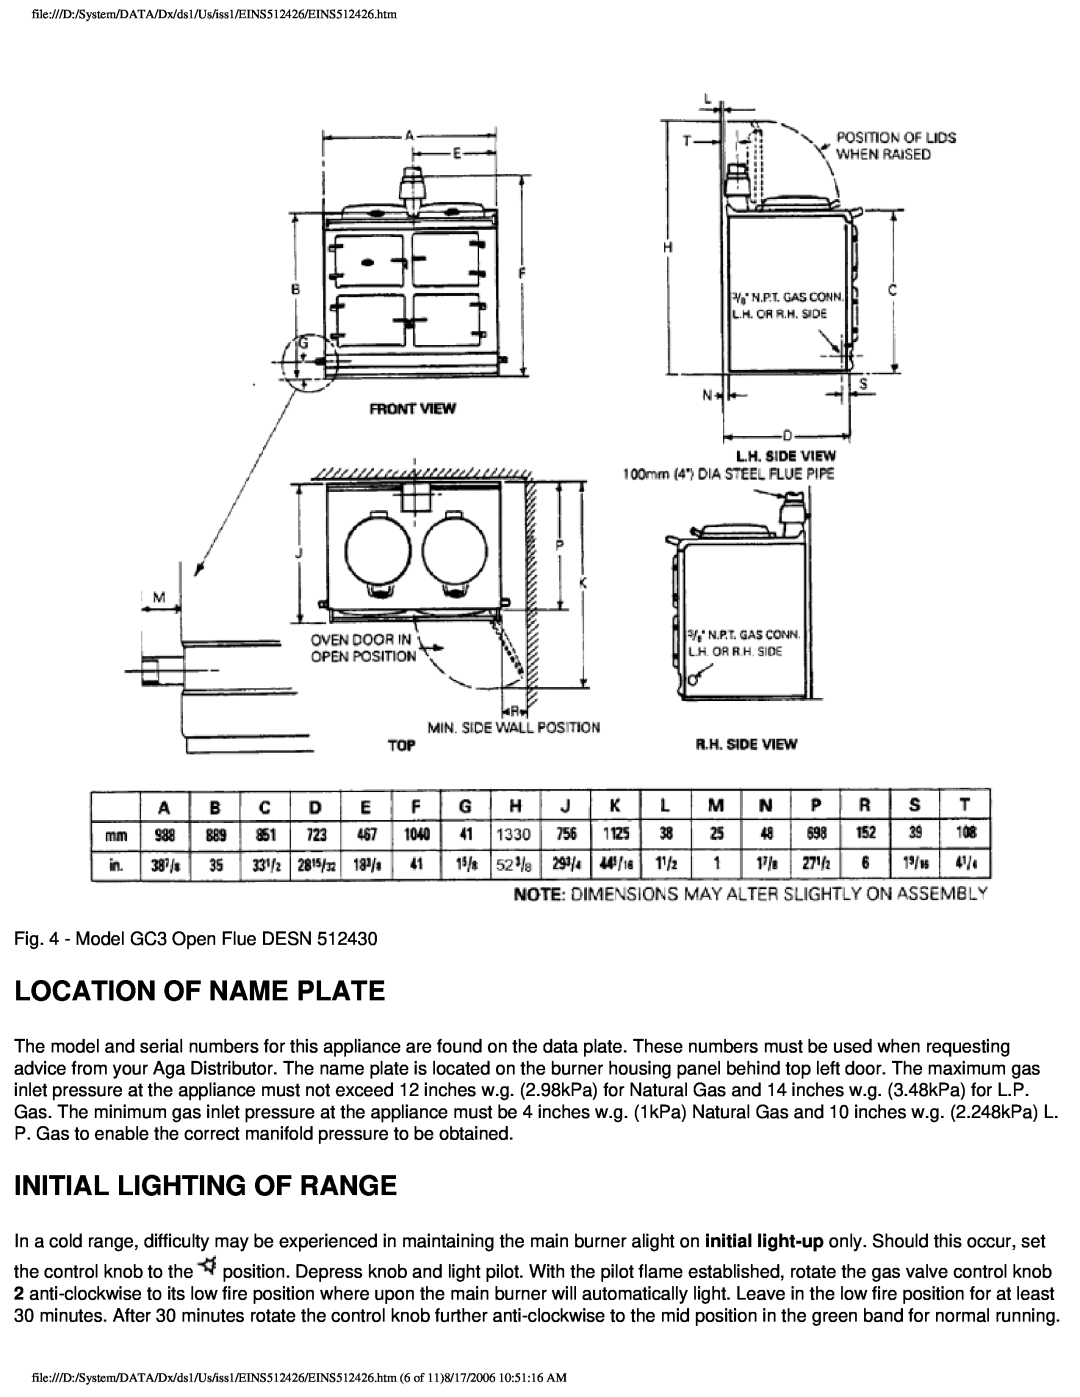 Aga Ranges GC 3 installation instructions Location Of Name Plate, Initial Lighting Of Range 